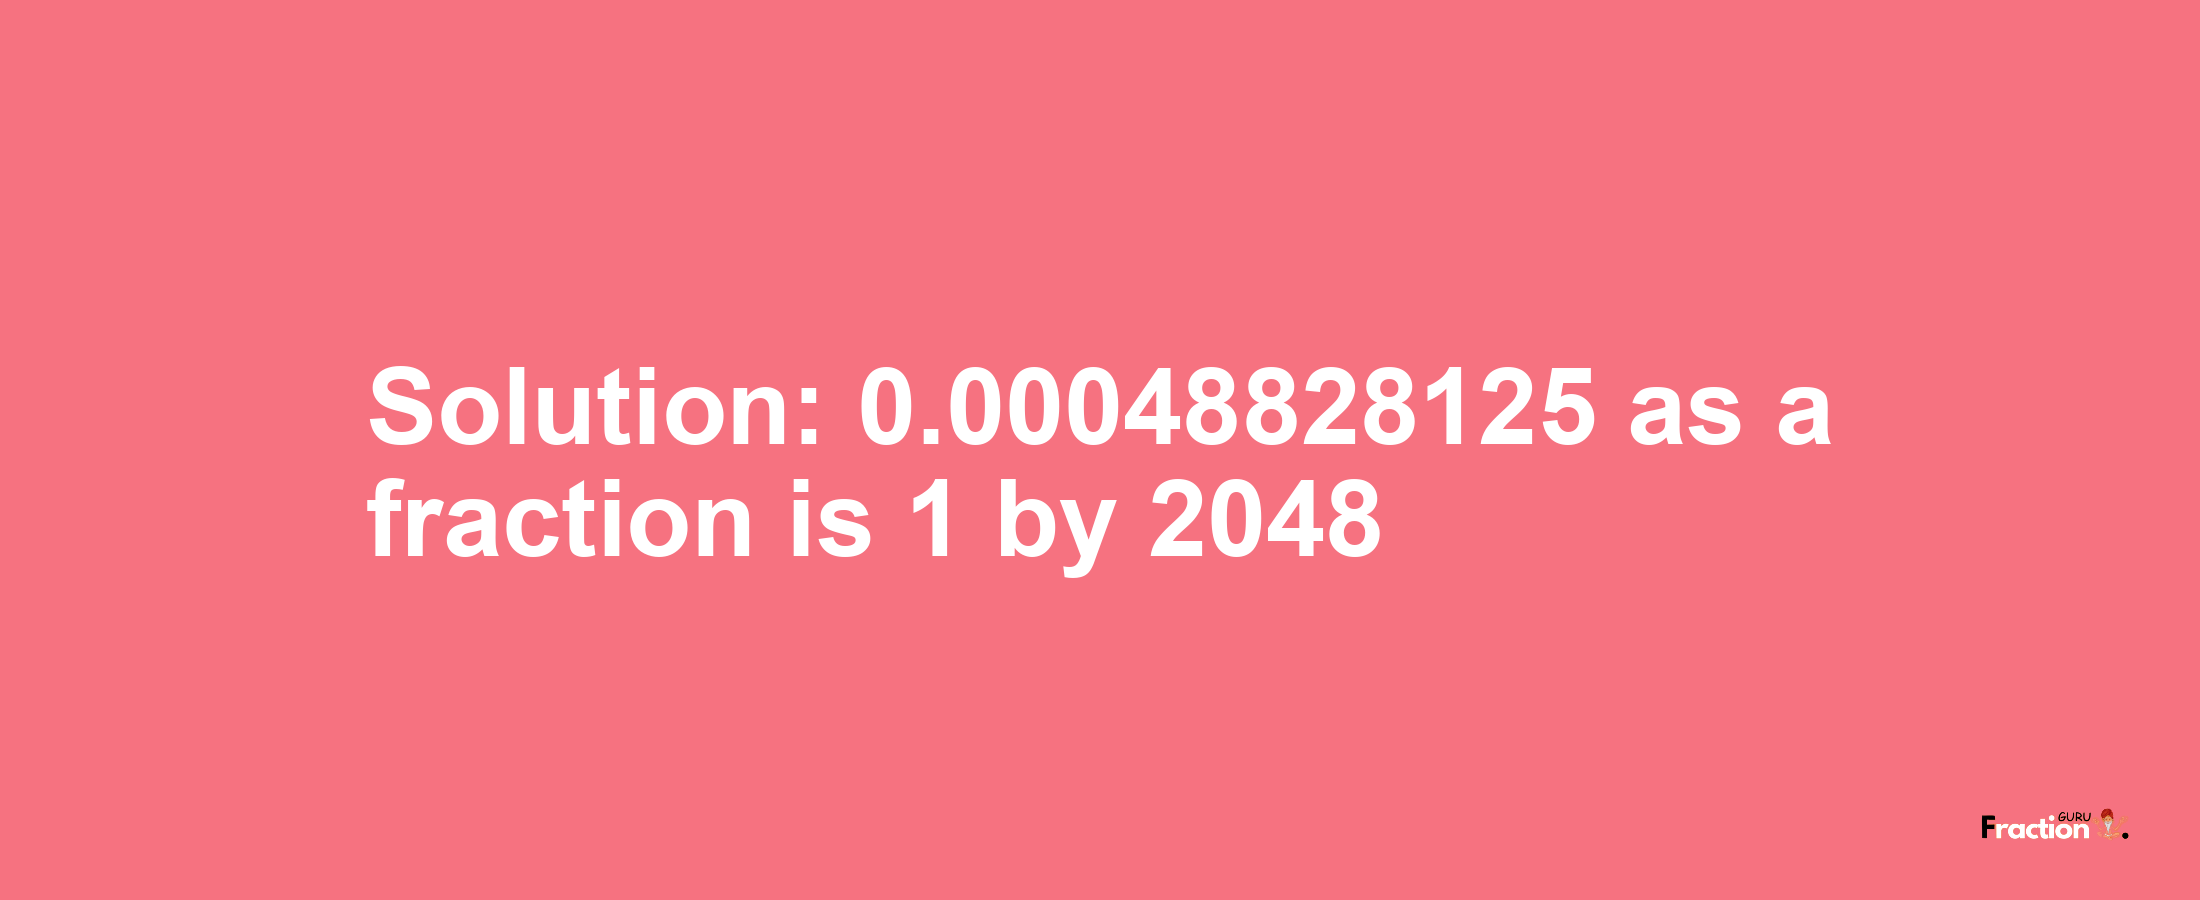 Solution:0.00048828125 as a fraction is 1/2048